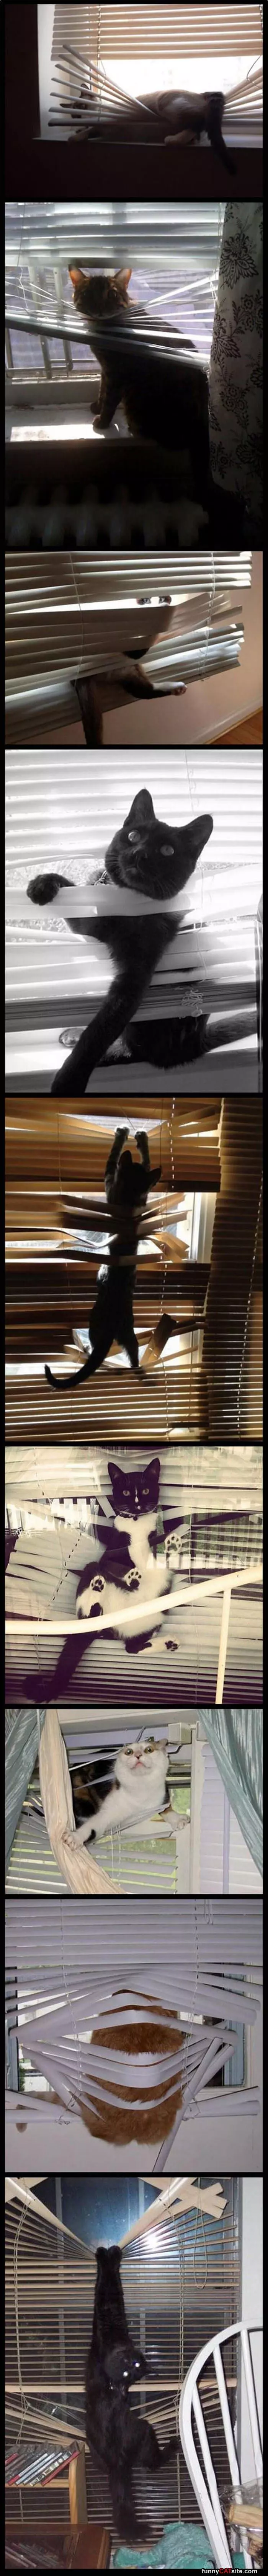 Cats Loving The Blinds